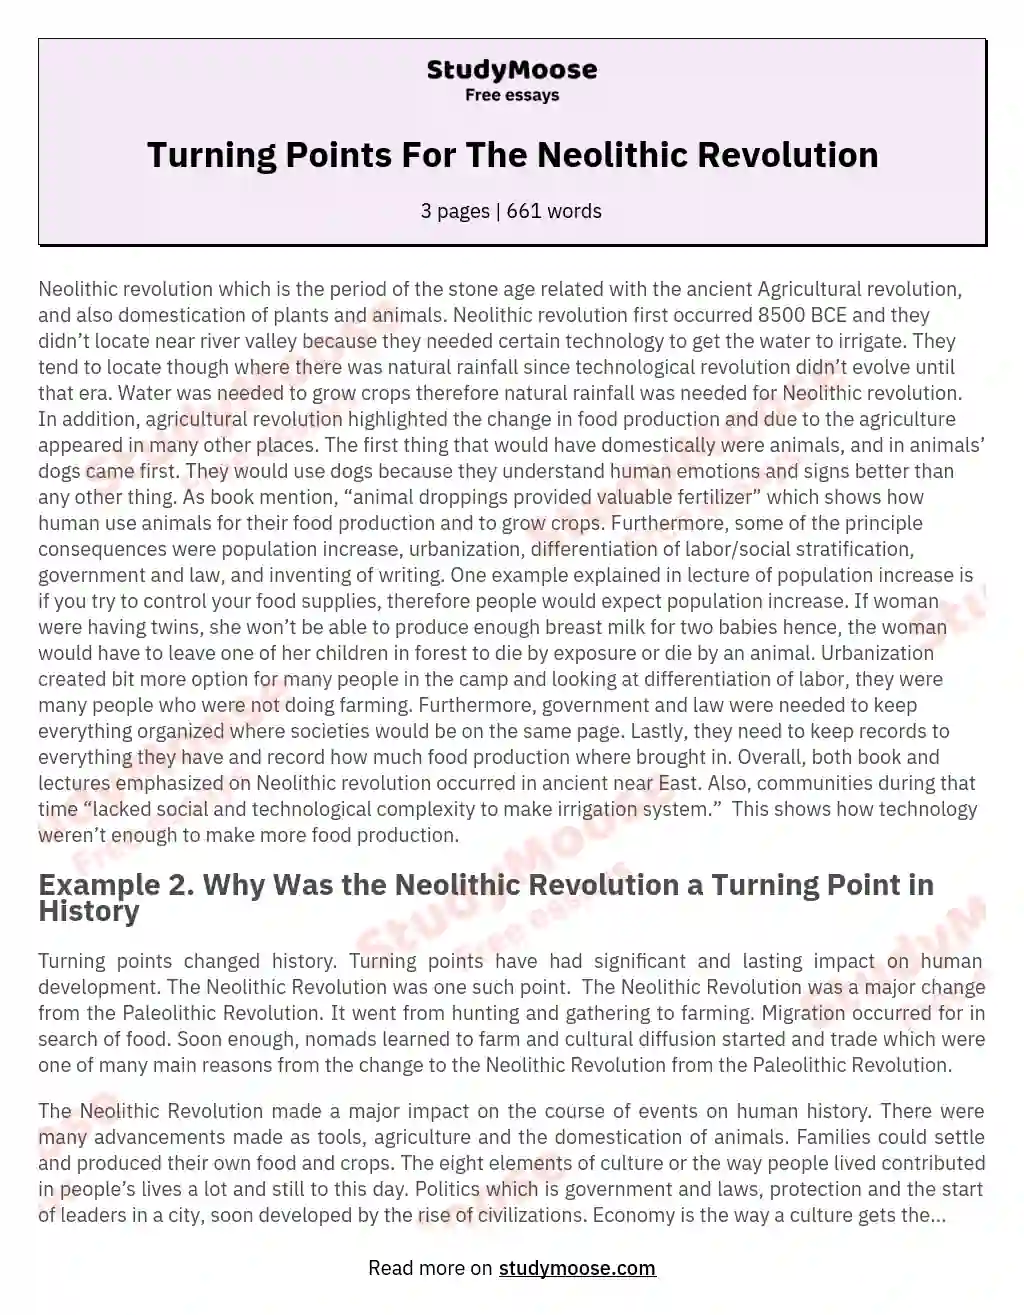 Turning Points For The Neolithic Revolution essay